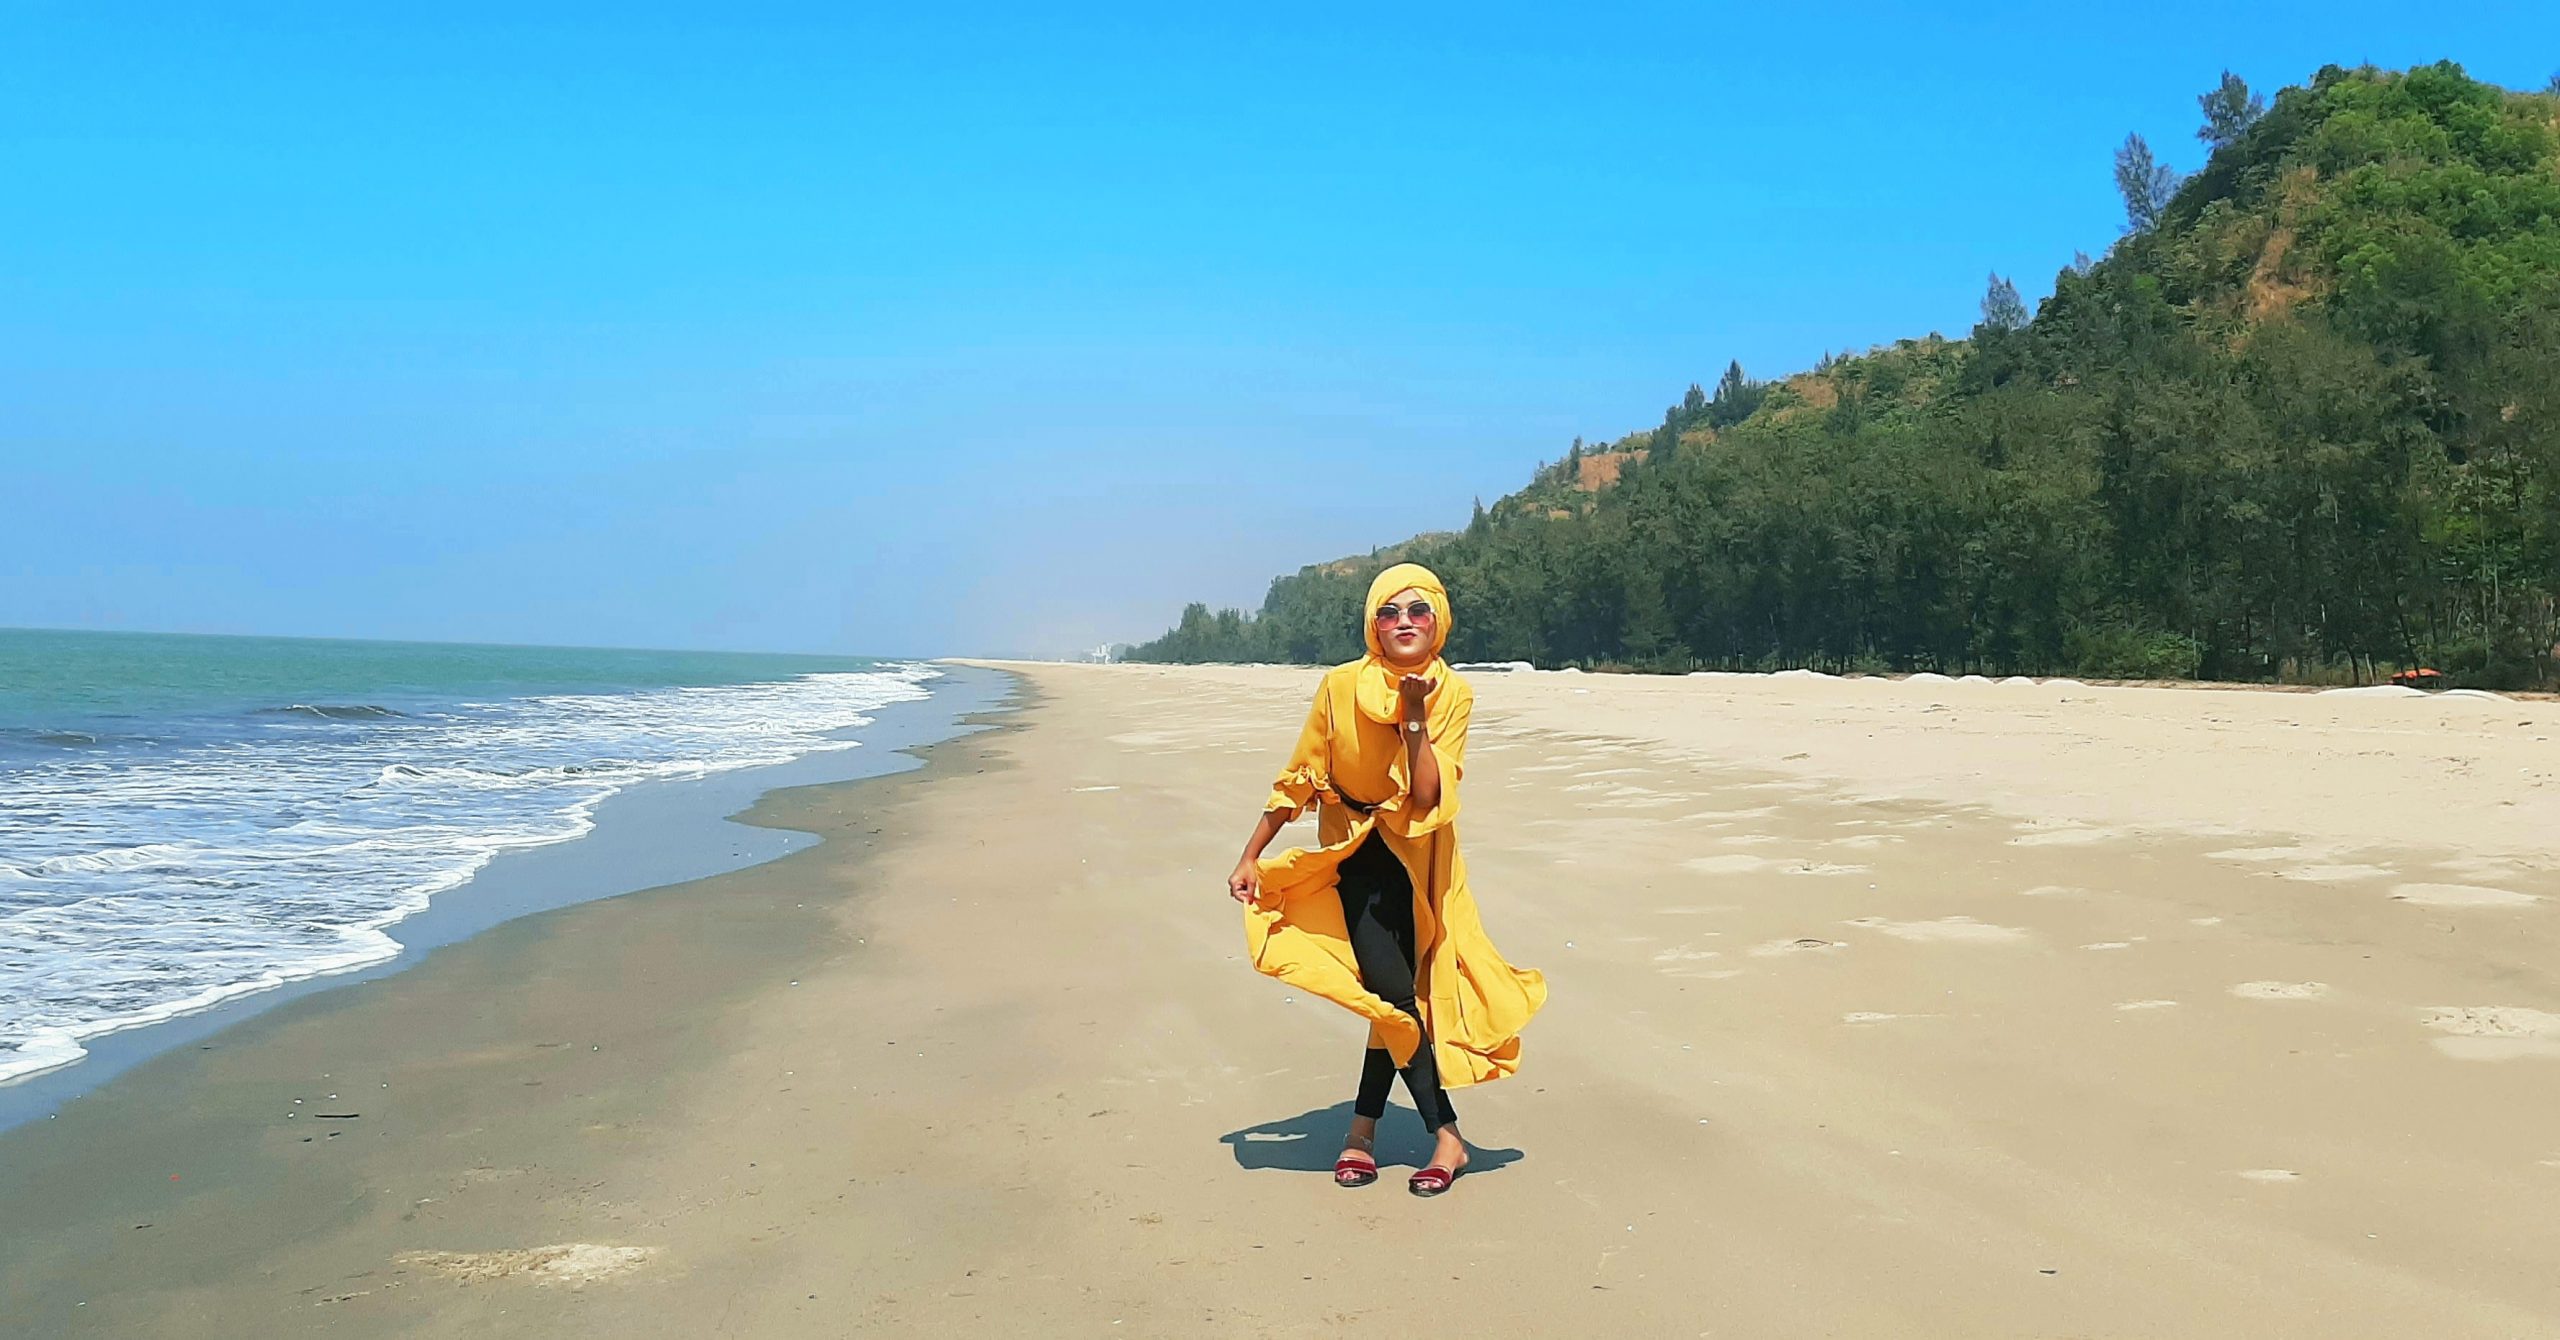 A girl is enjoying the natural beauty of Cox's Bazar